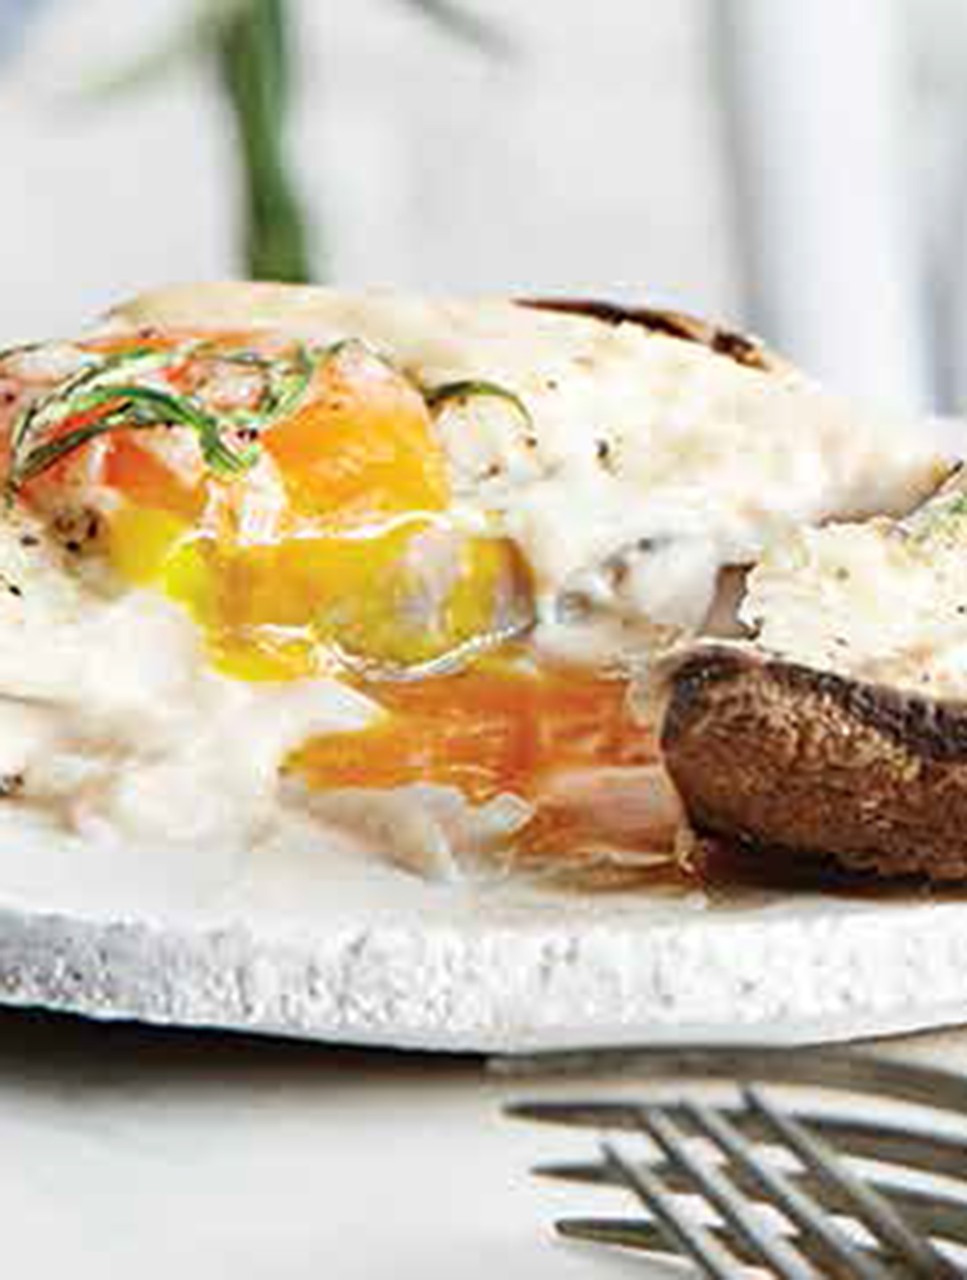 Baked Eggs in Mushroom Caps with Mornay Sauce